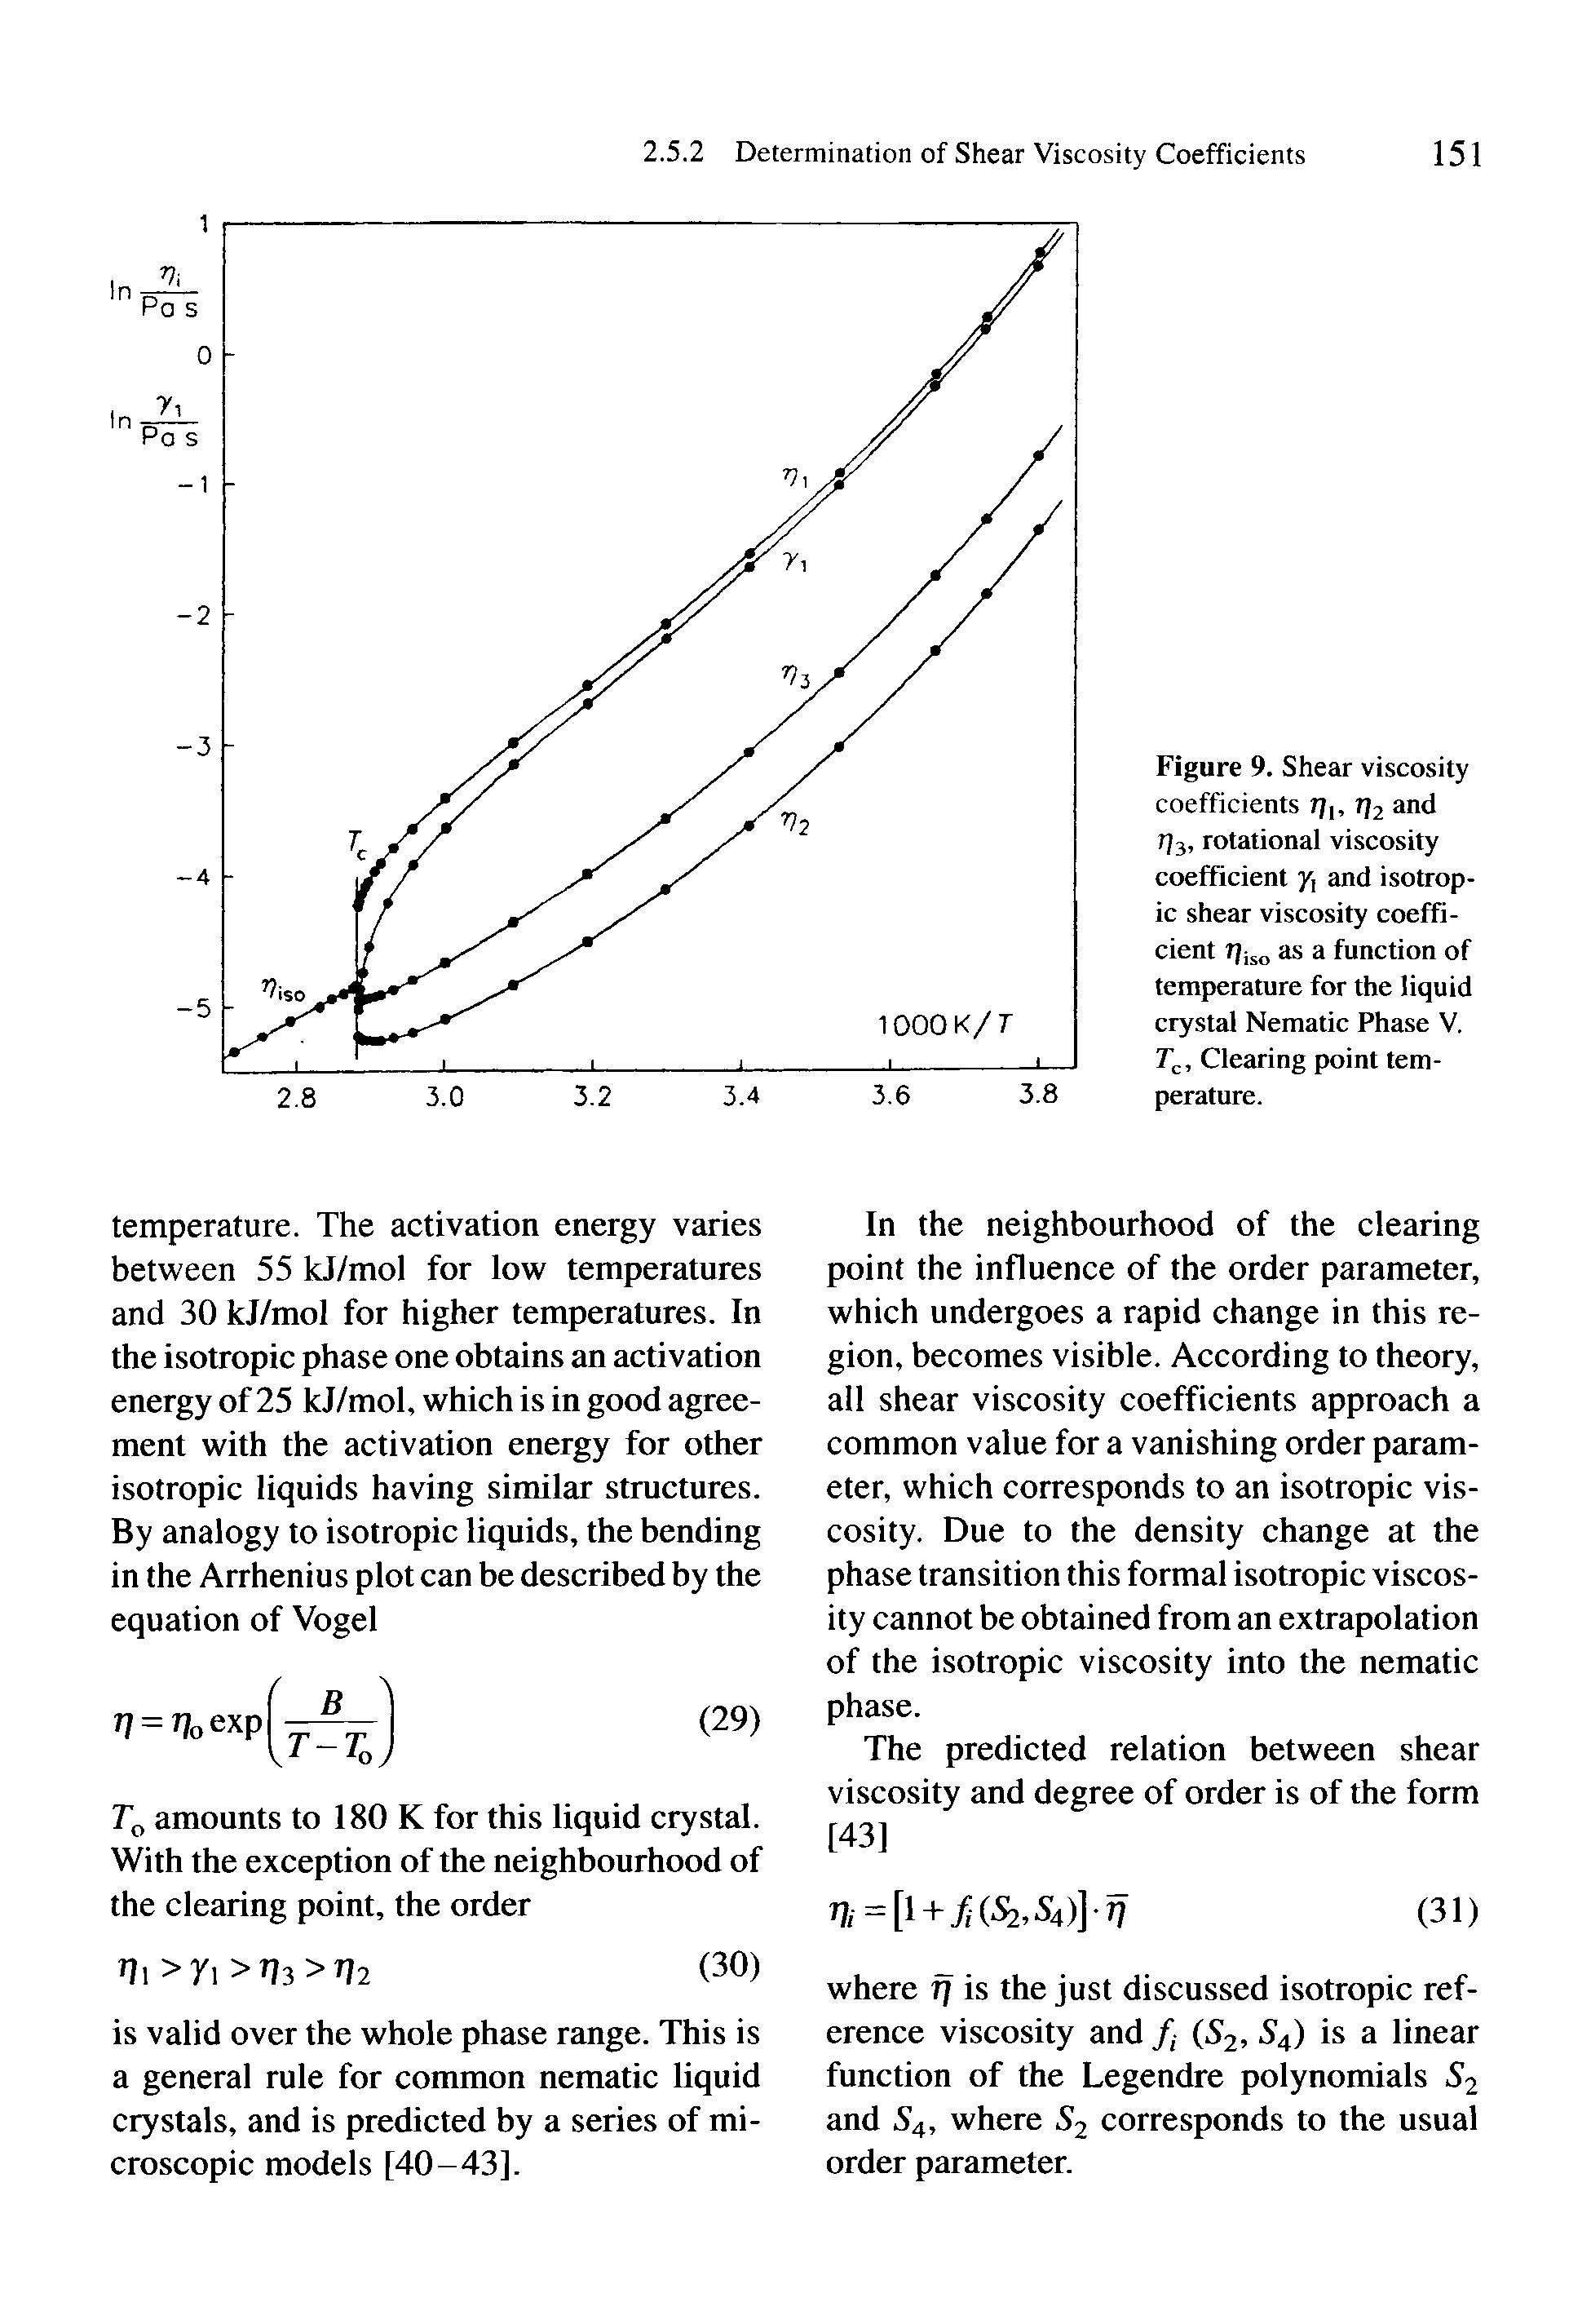 Figure 9. Shear viscosity coefficients r/i, t 2 and t)3, rotational viscosity coefficient y, and isotropic shear viscosity coefficient as a function of temperature for the liquid crystal Nematic Phase V. T, Clearing point temperature.